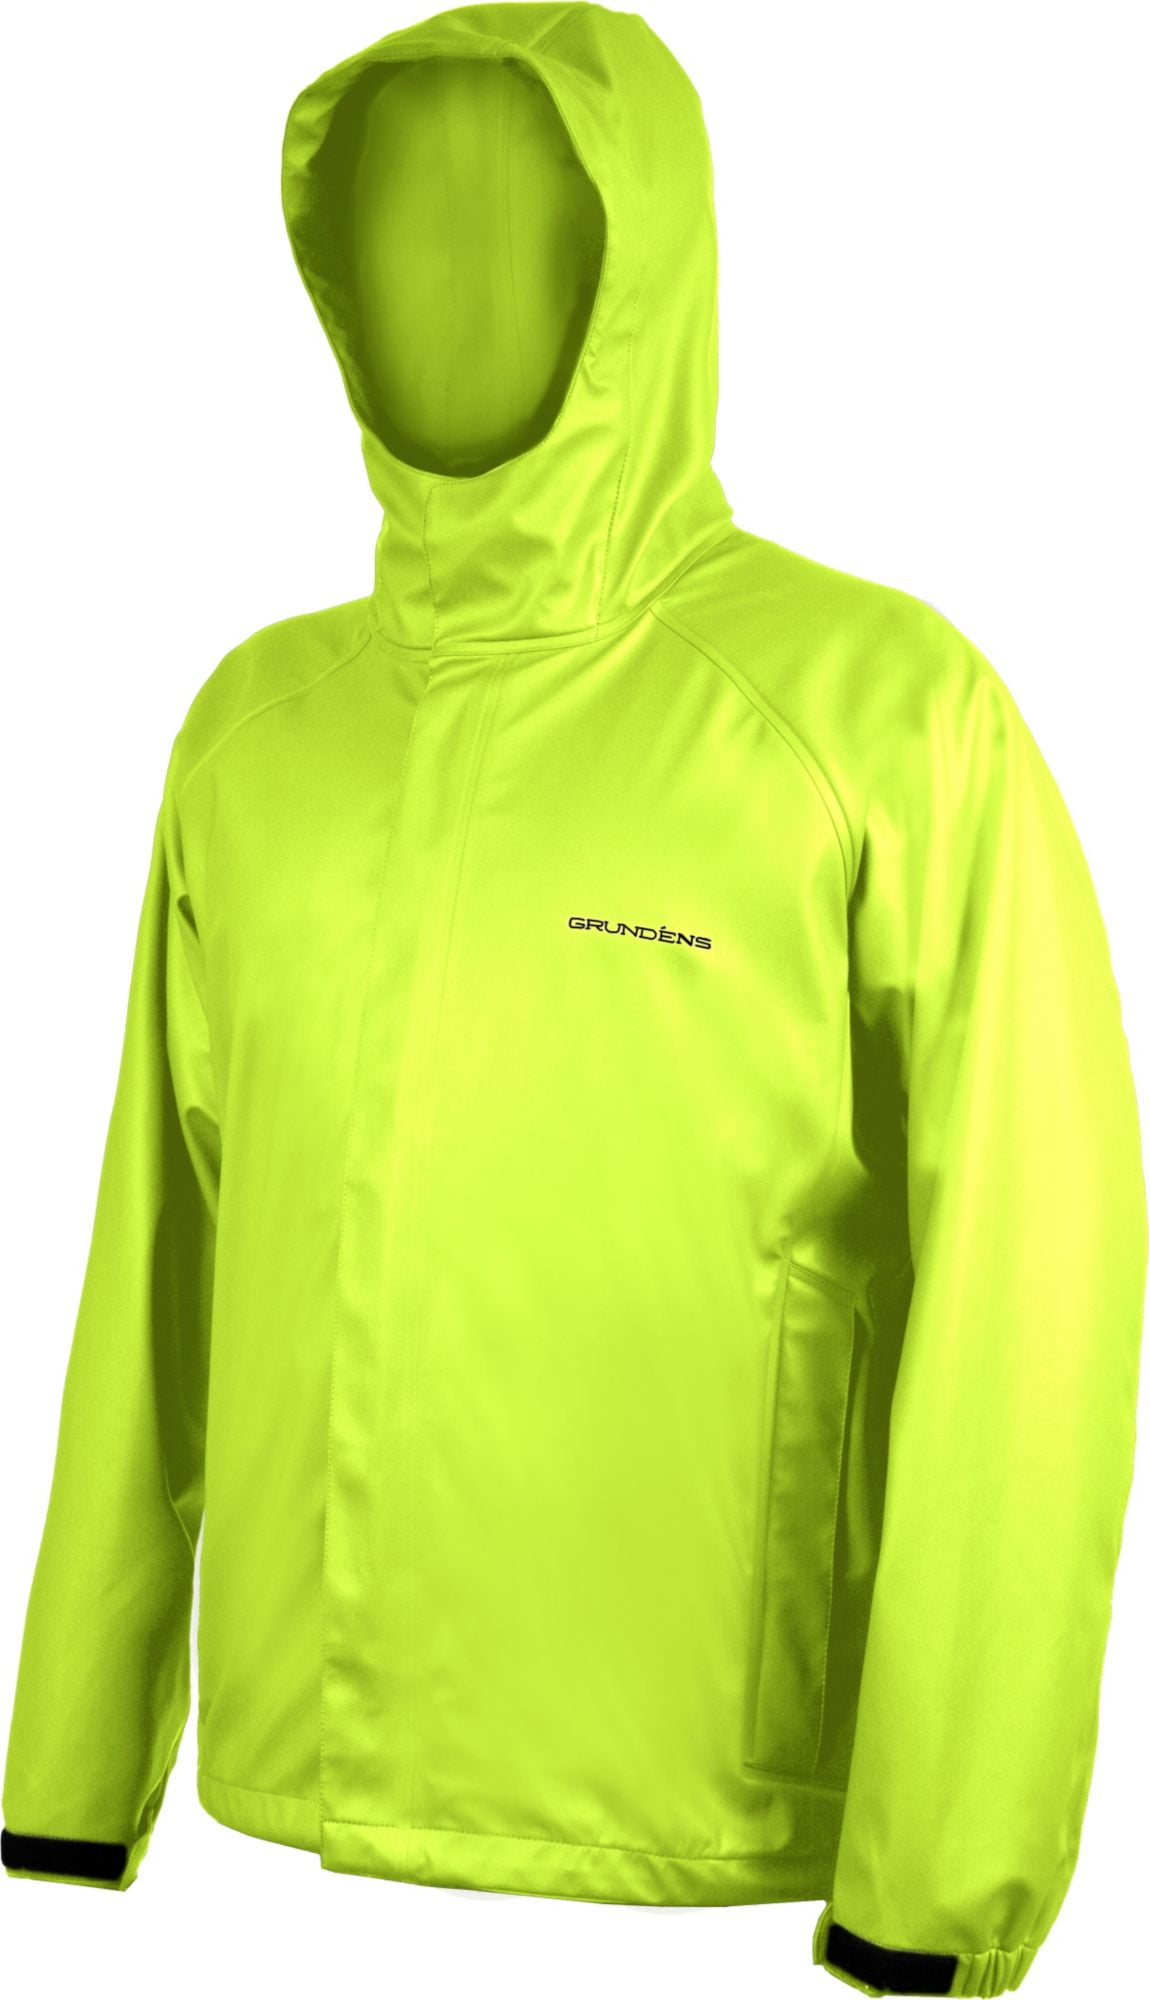 Grundens Neptune 319 Commercial Fishing Jacket 5 Colors 